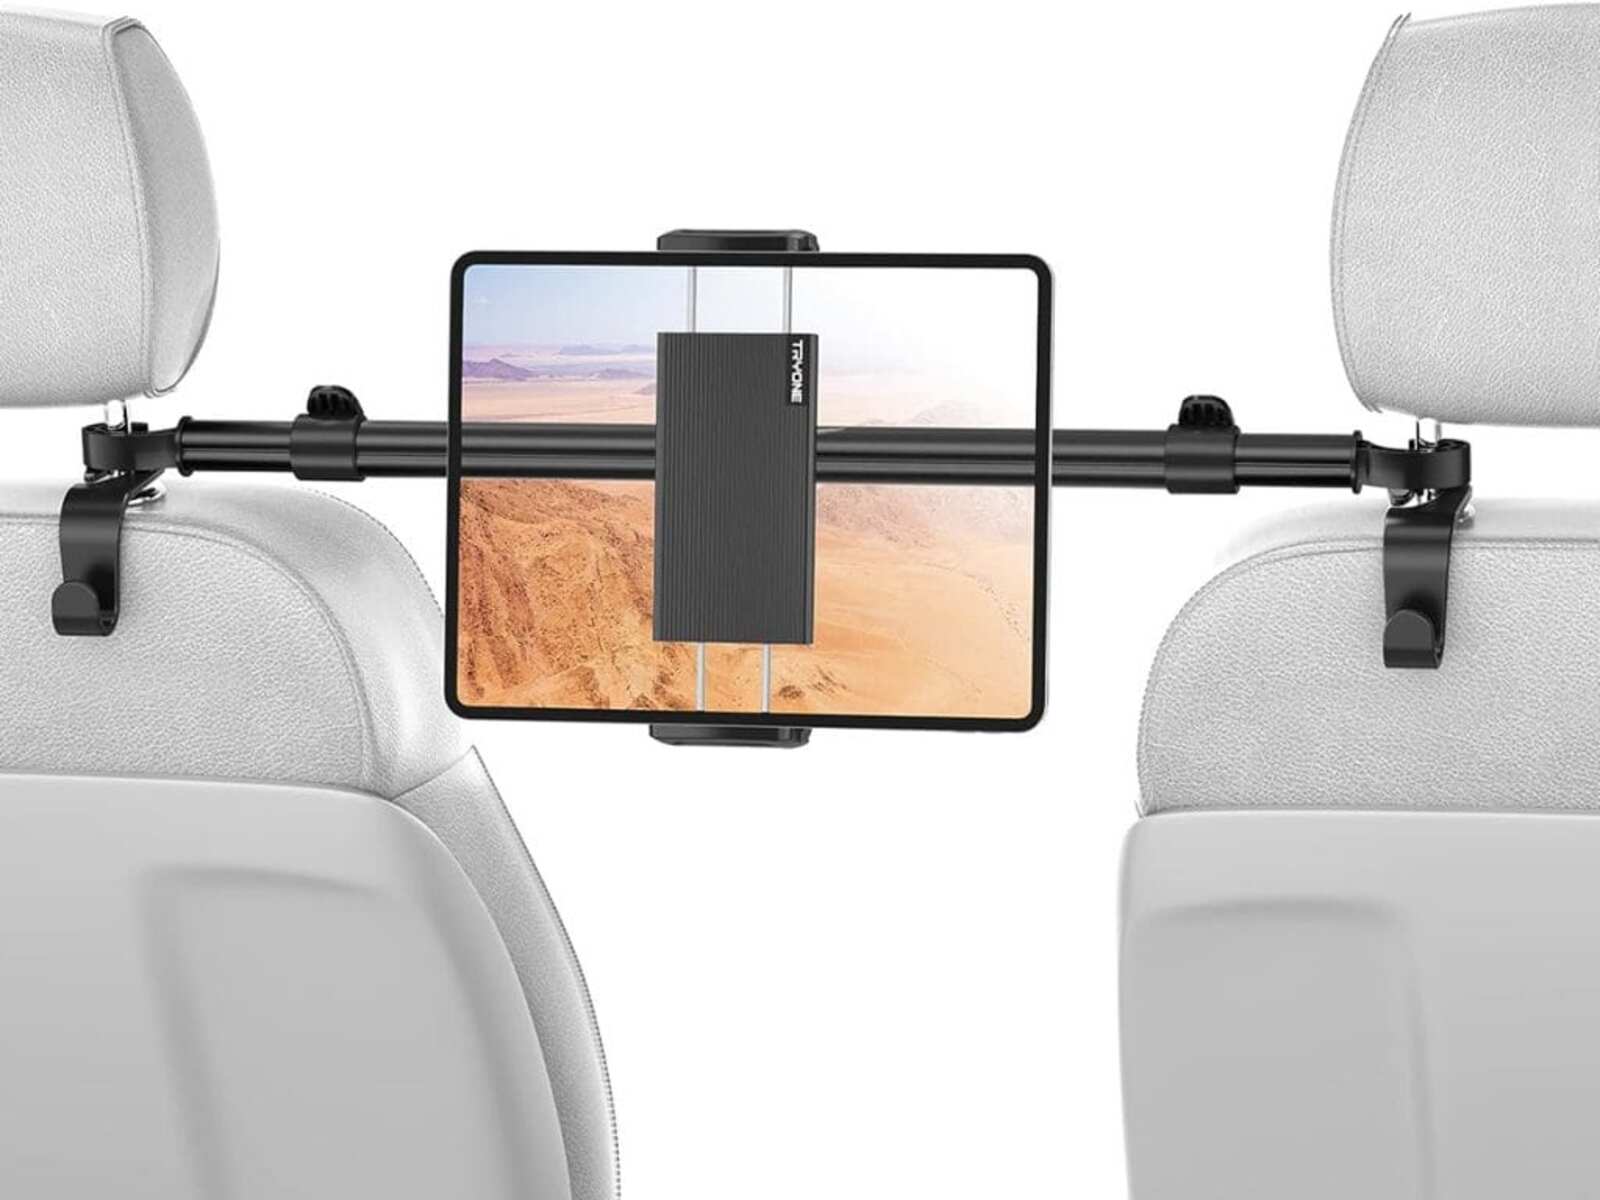 The Best iPad Holders and iPad Mounts for Cars